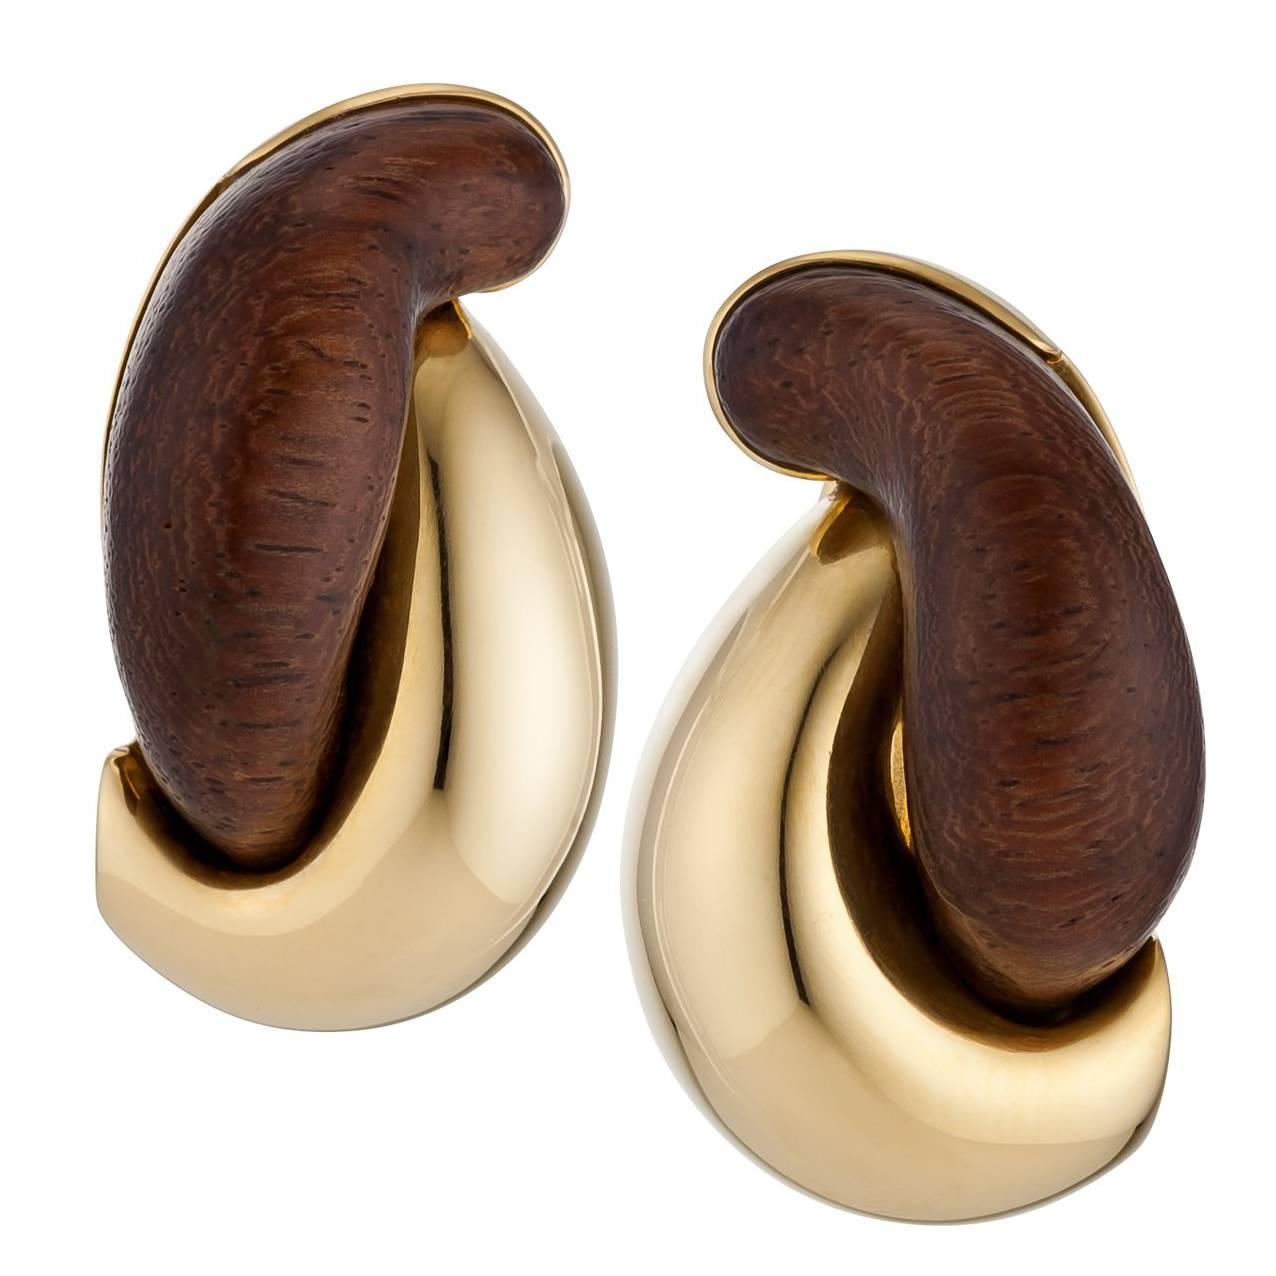 Seaman Schepps Rosewood and Gold Earrings